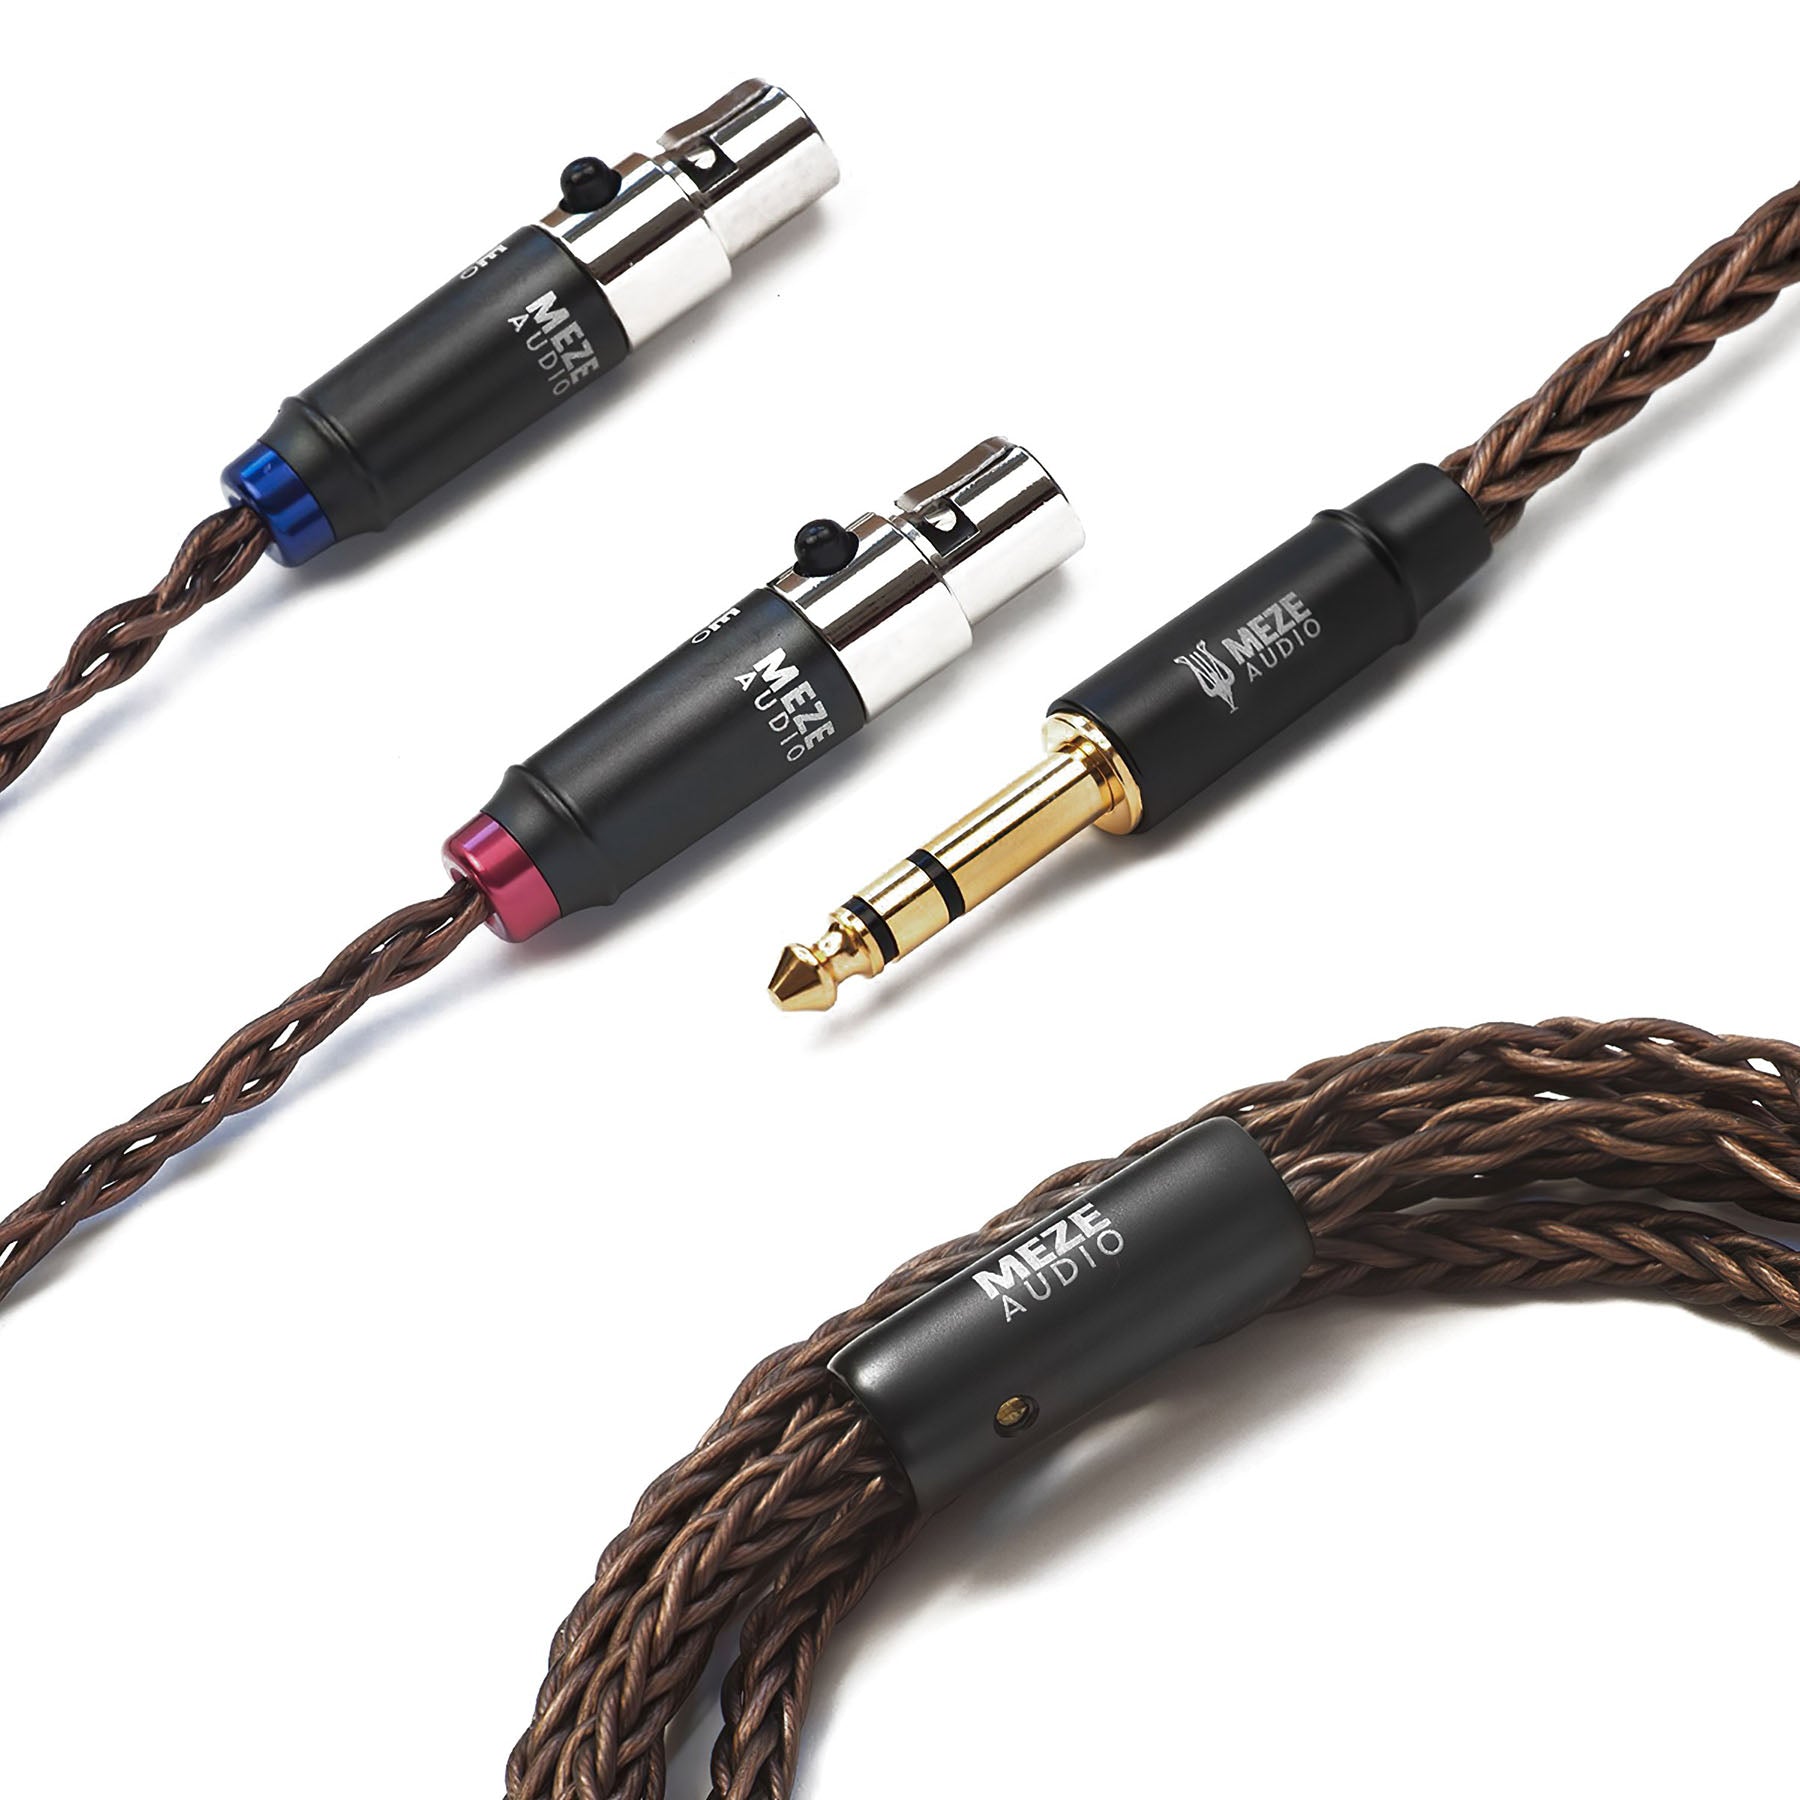 Meze Audio 6.3mm Copper PCUHD Upgrade Cable for Elite and Empyrean